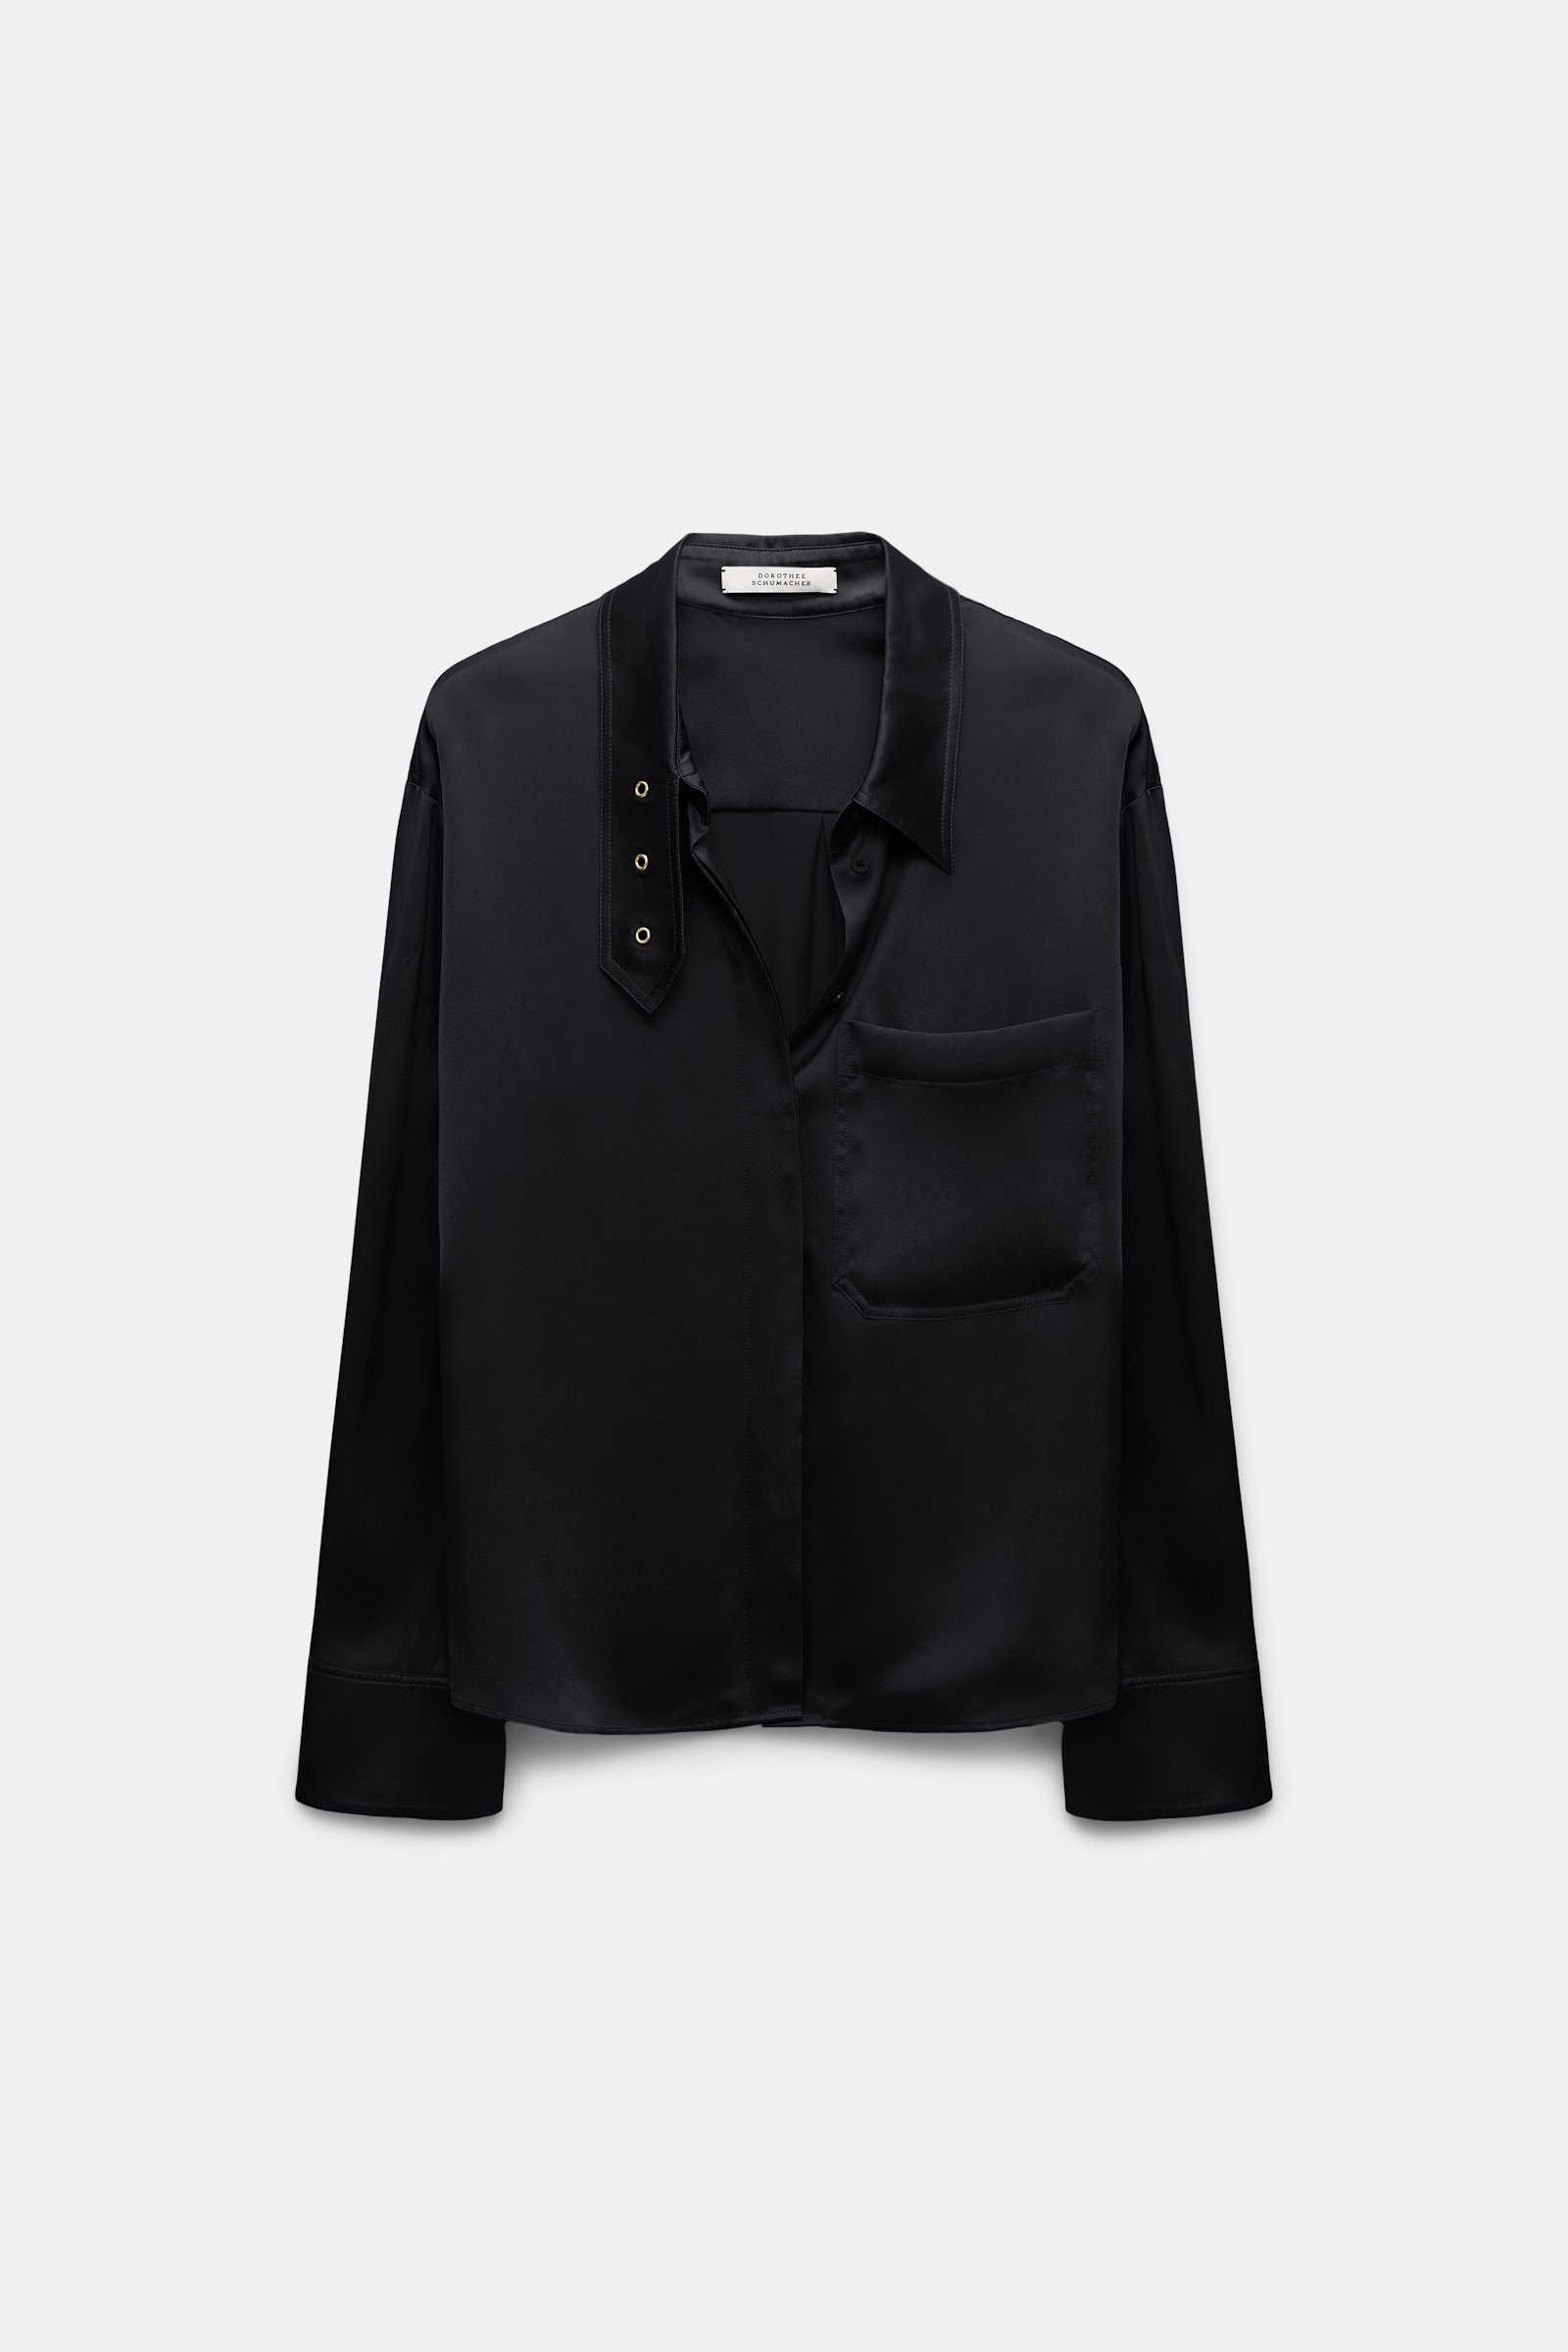 Dorothee Schumacher Silk charmeuse blouse with collar detail pure black